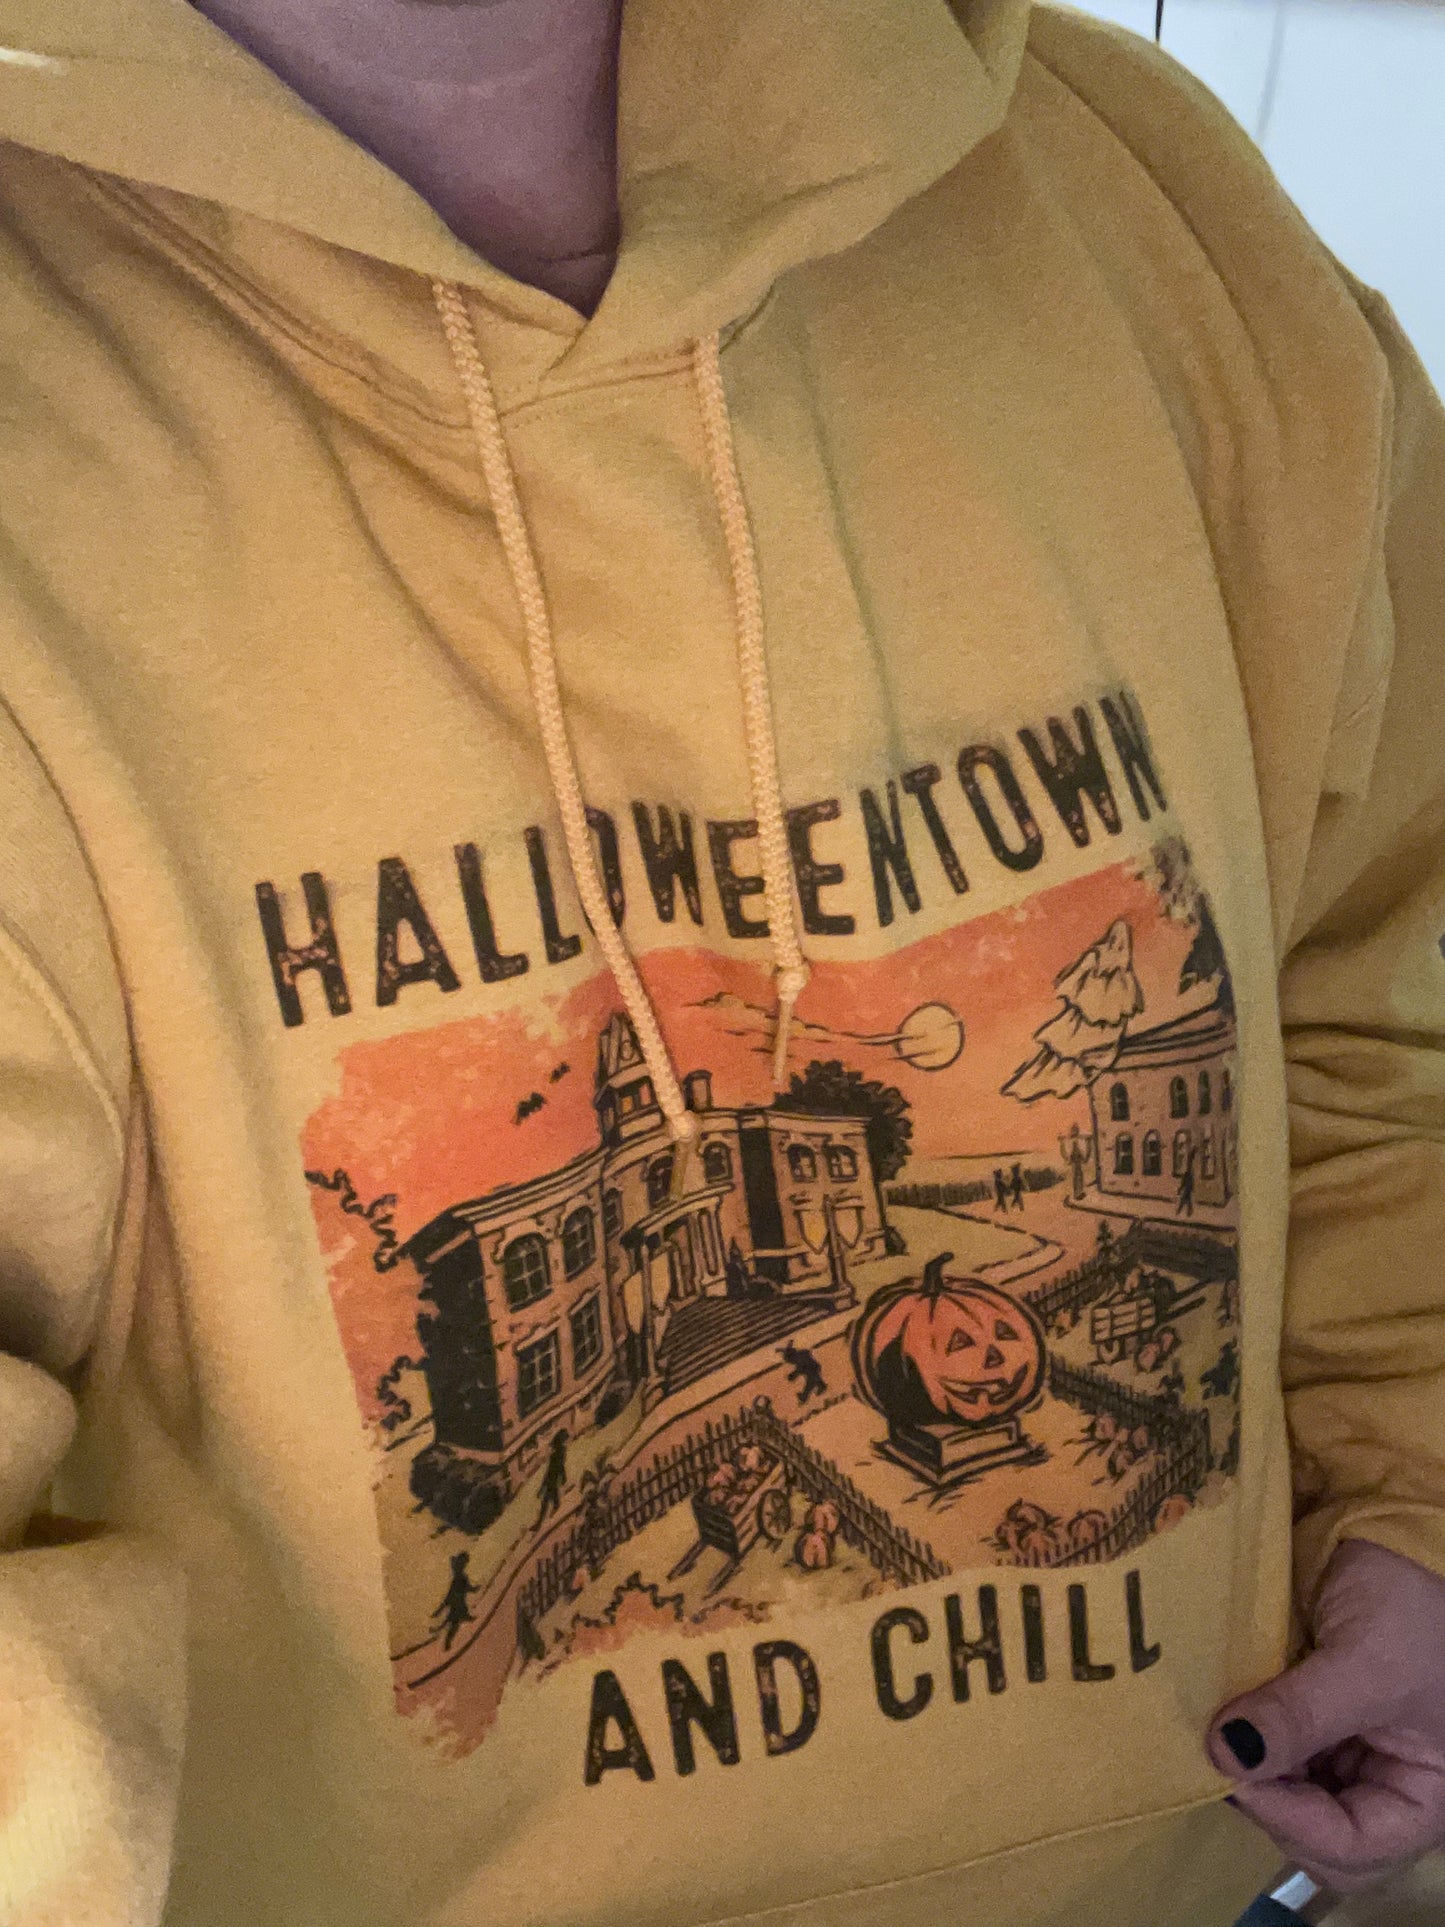 Hallo town and chill hoodie